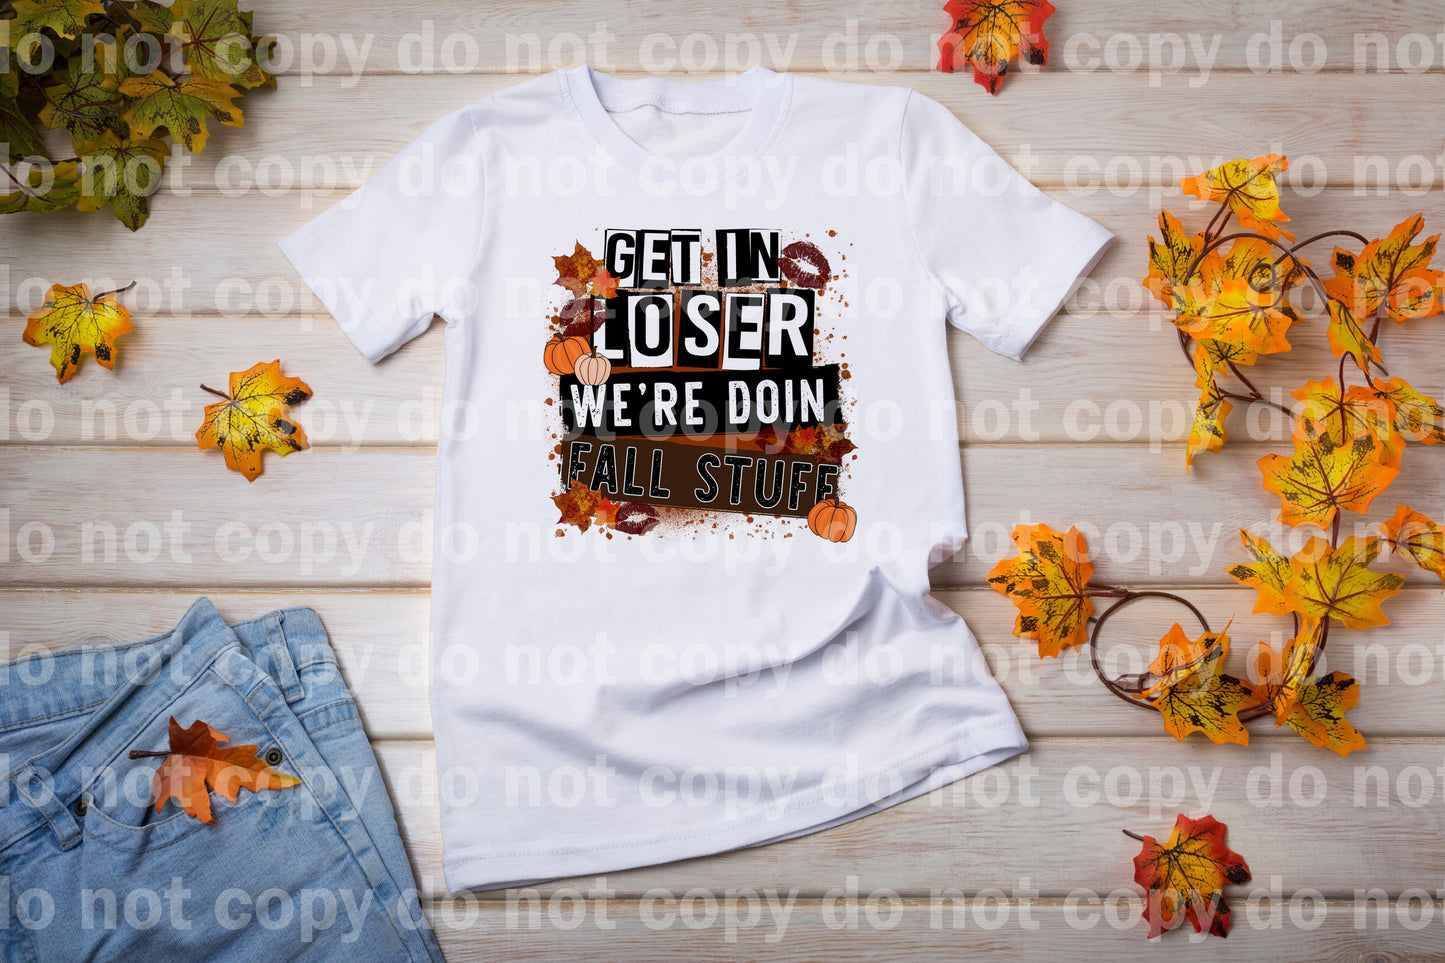 Get In Loser We're Doin Fall Stuff Dream Print or Sublimation Print